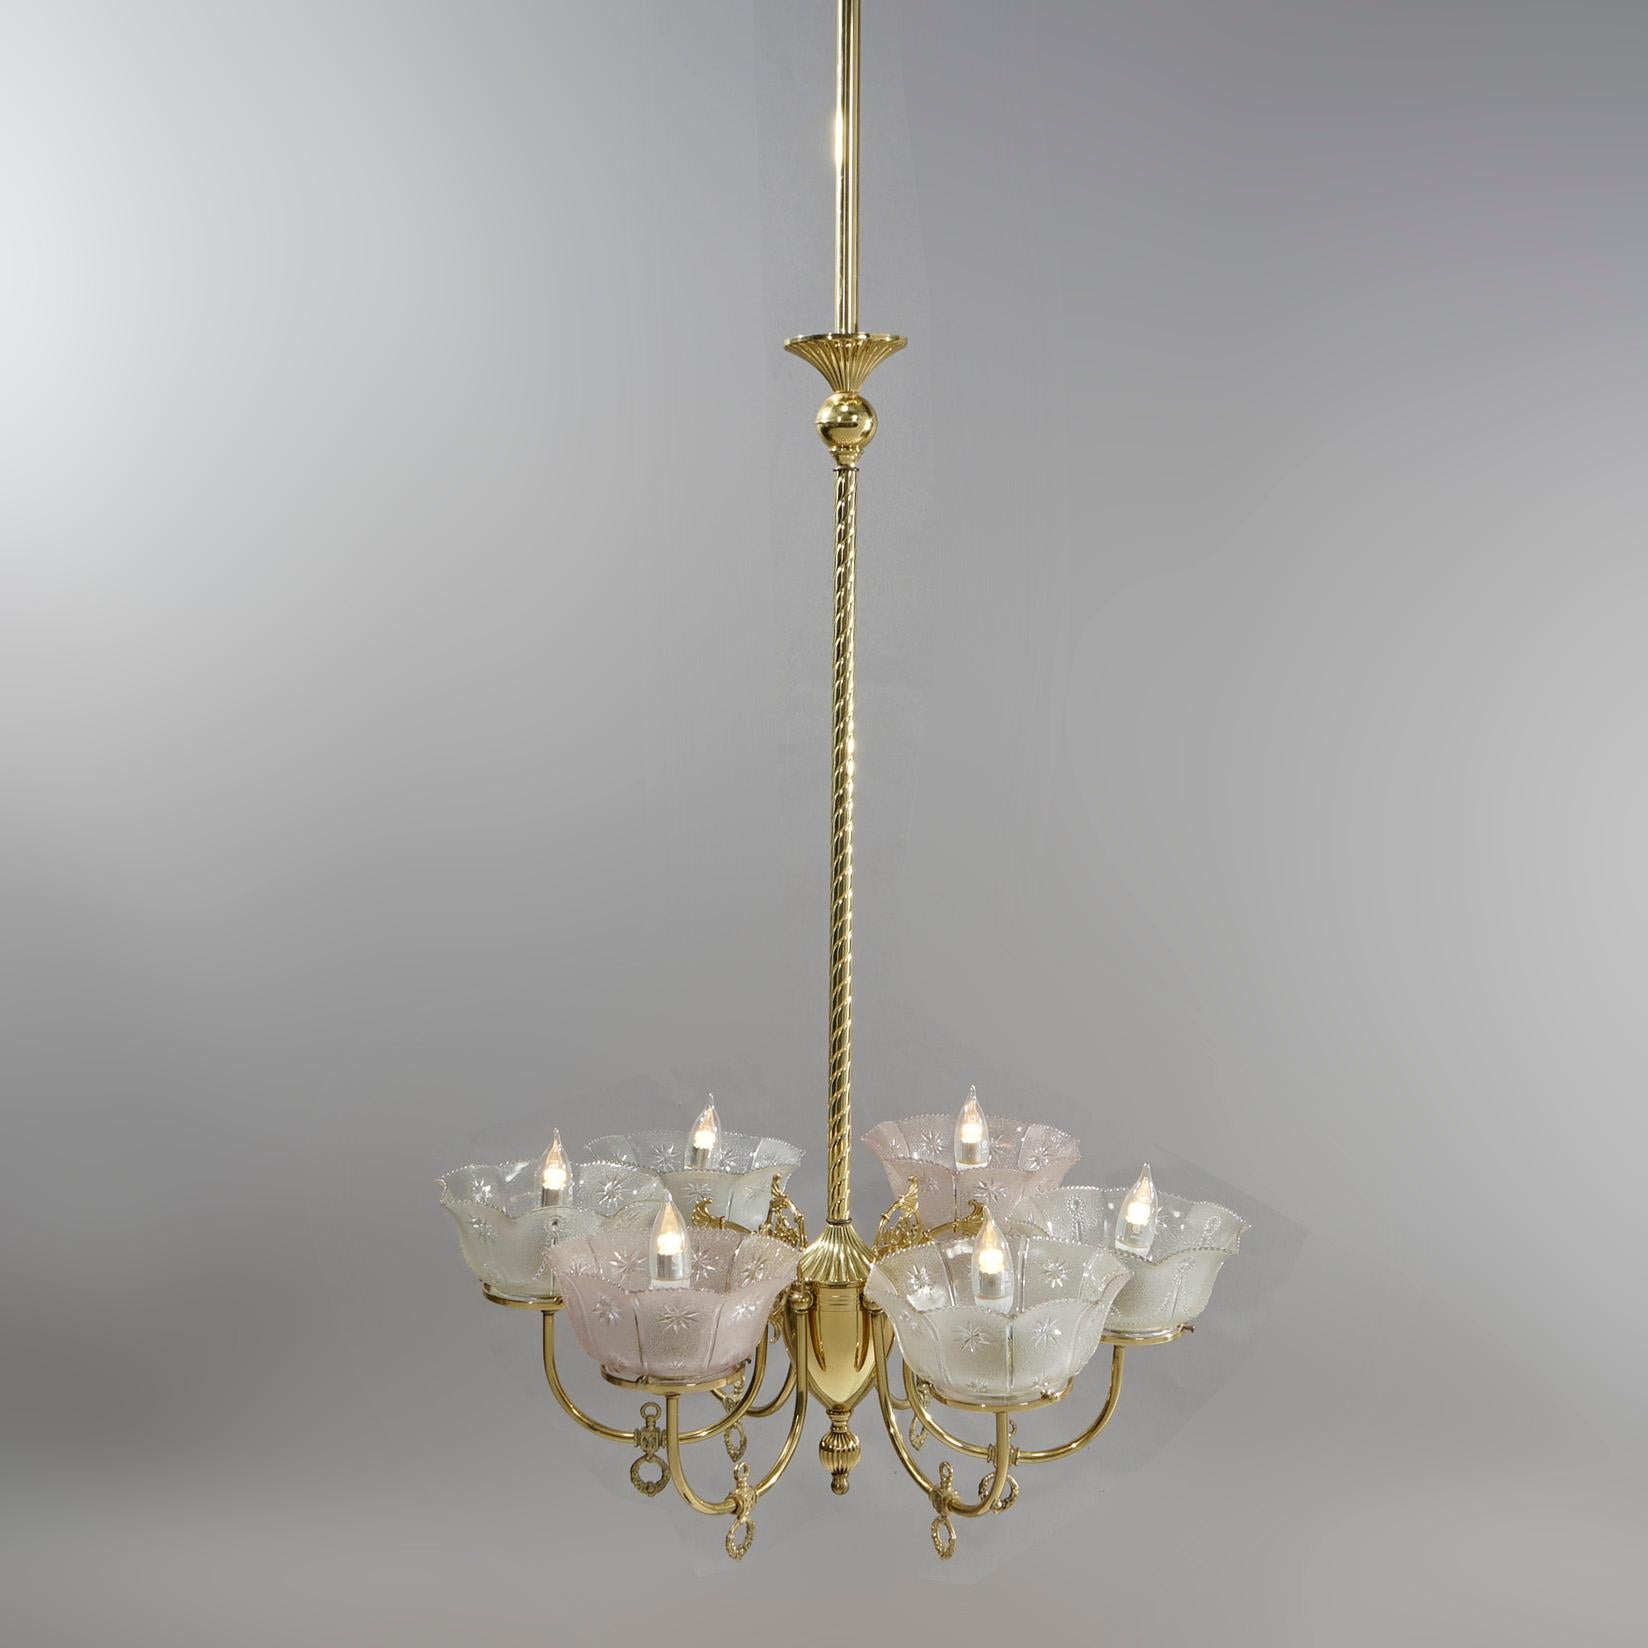 An antique Victorian electrified gas chandelier offers brass frame with rope twist shaft having six scroll form arms terminating in etched glass shades (non-matching), c1890

Measures- 79''H x 26.5''W x 26.5''D

Catalogue Note: Ask about DISCOUNTED